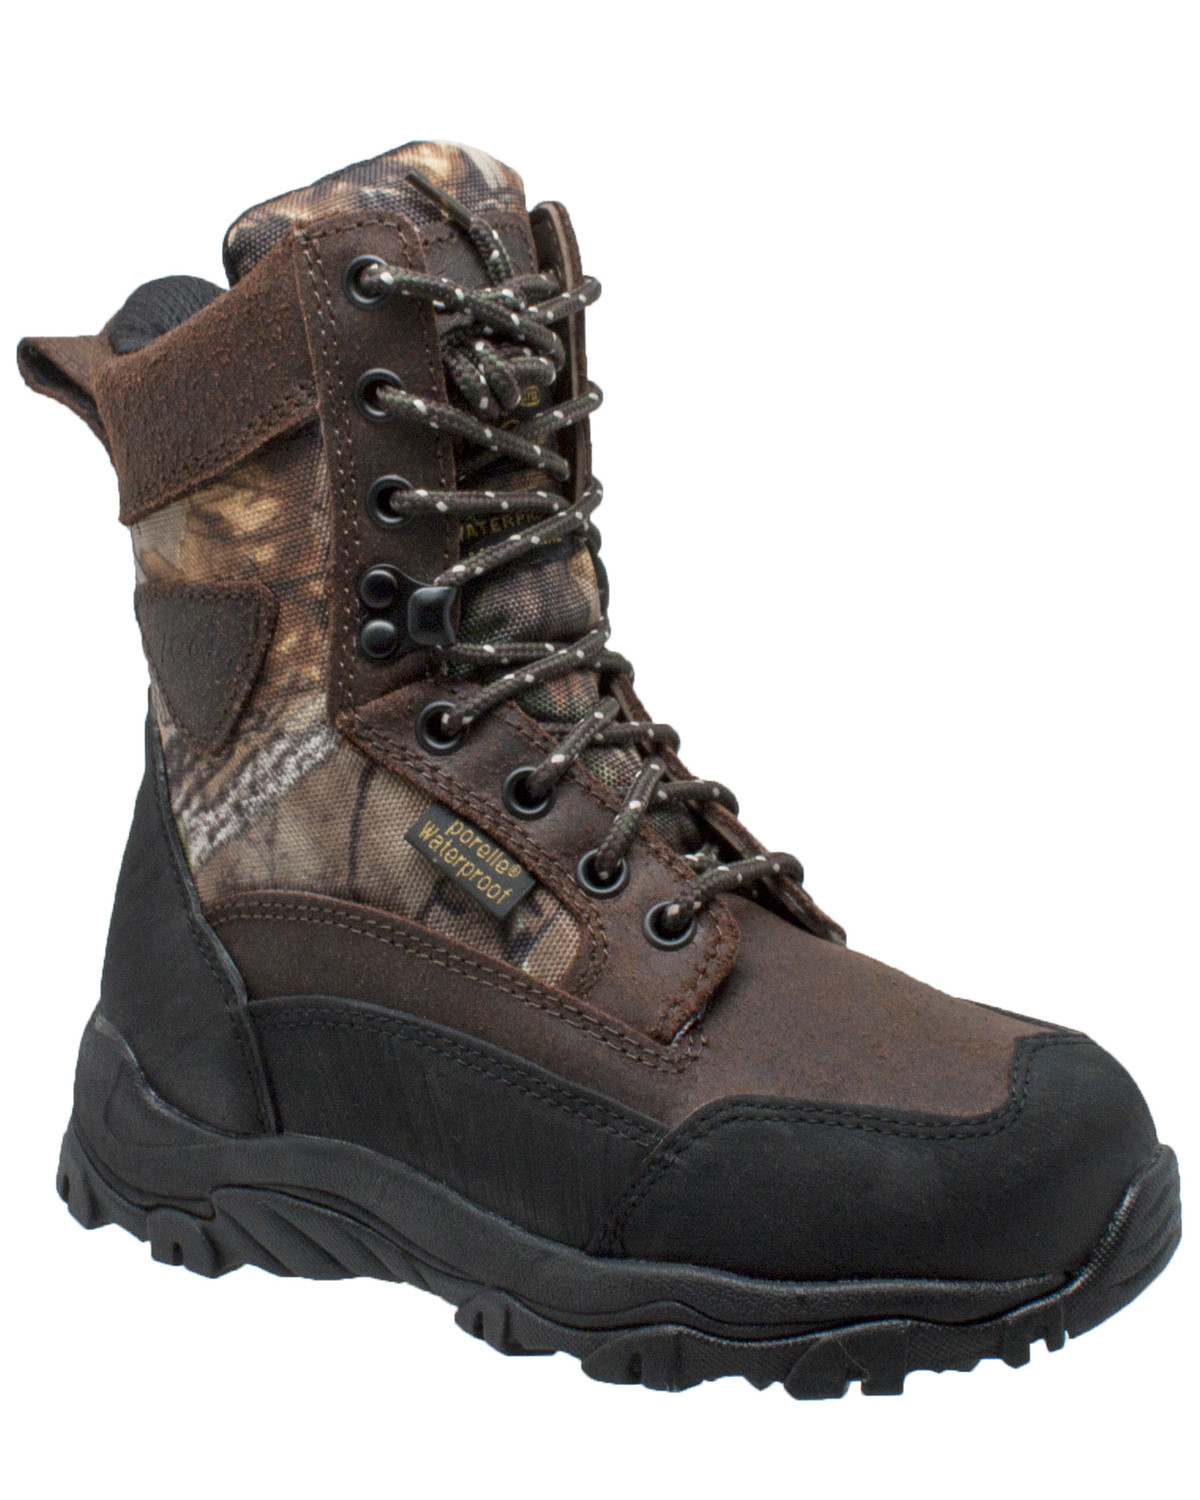 Ad Tec Boys' Waterproof Hunting Boots - Round Toe - Country Outfitter